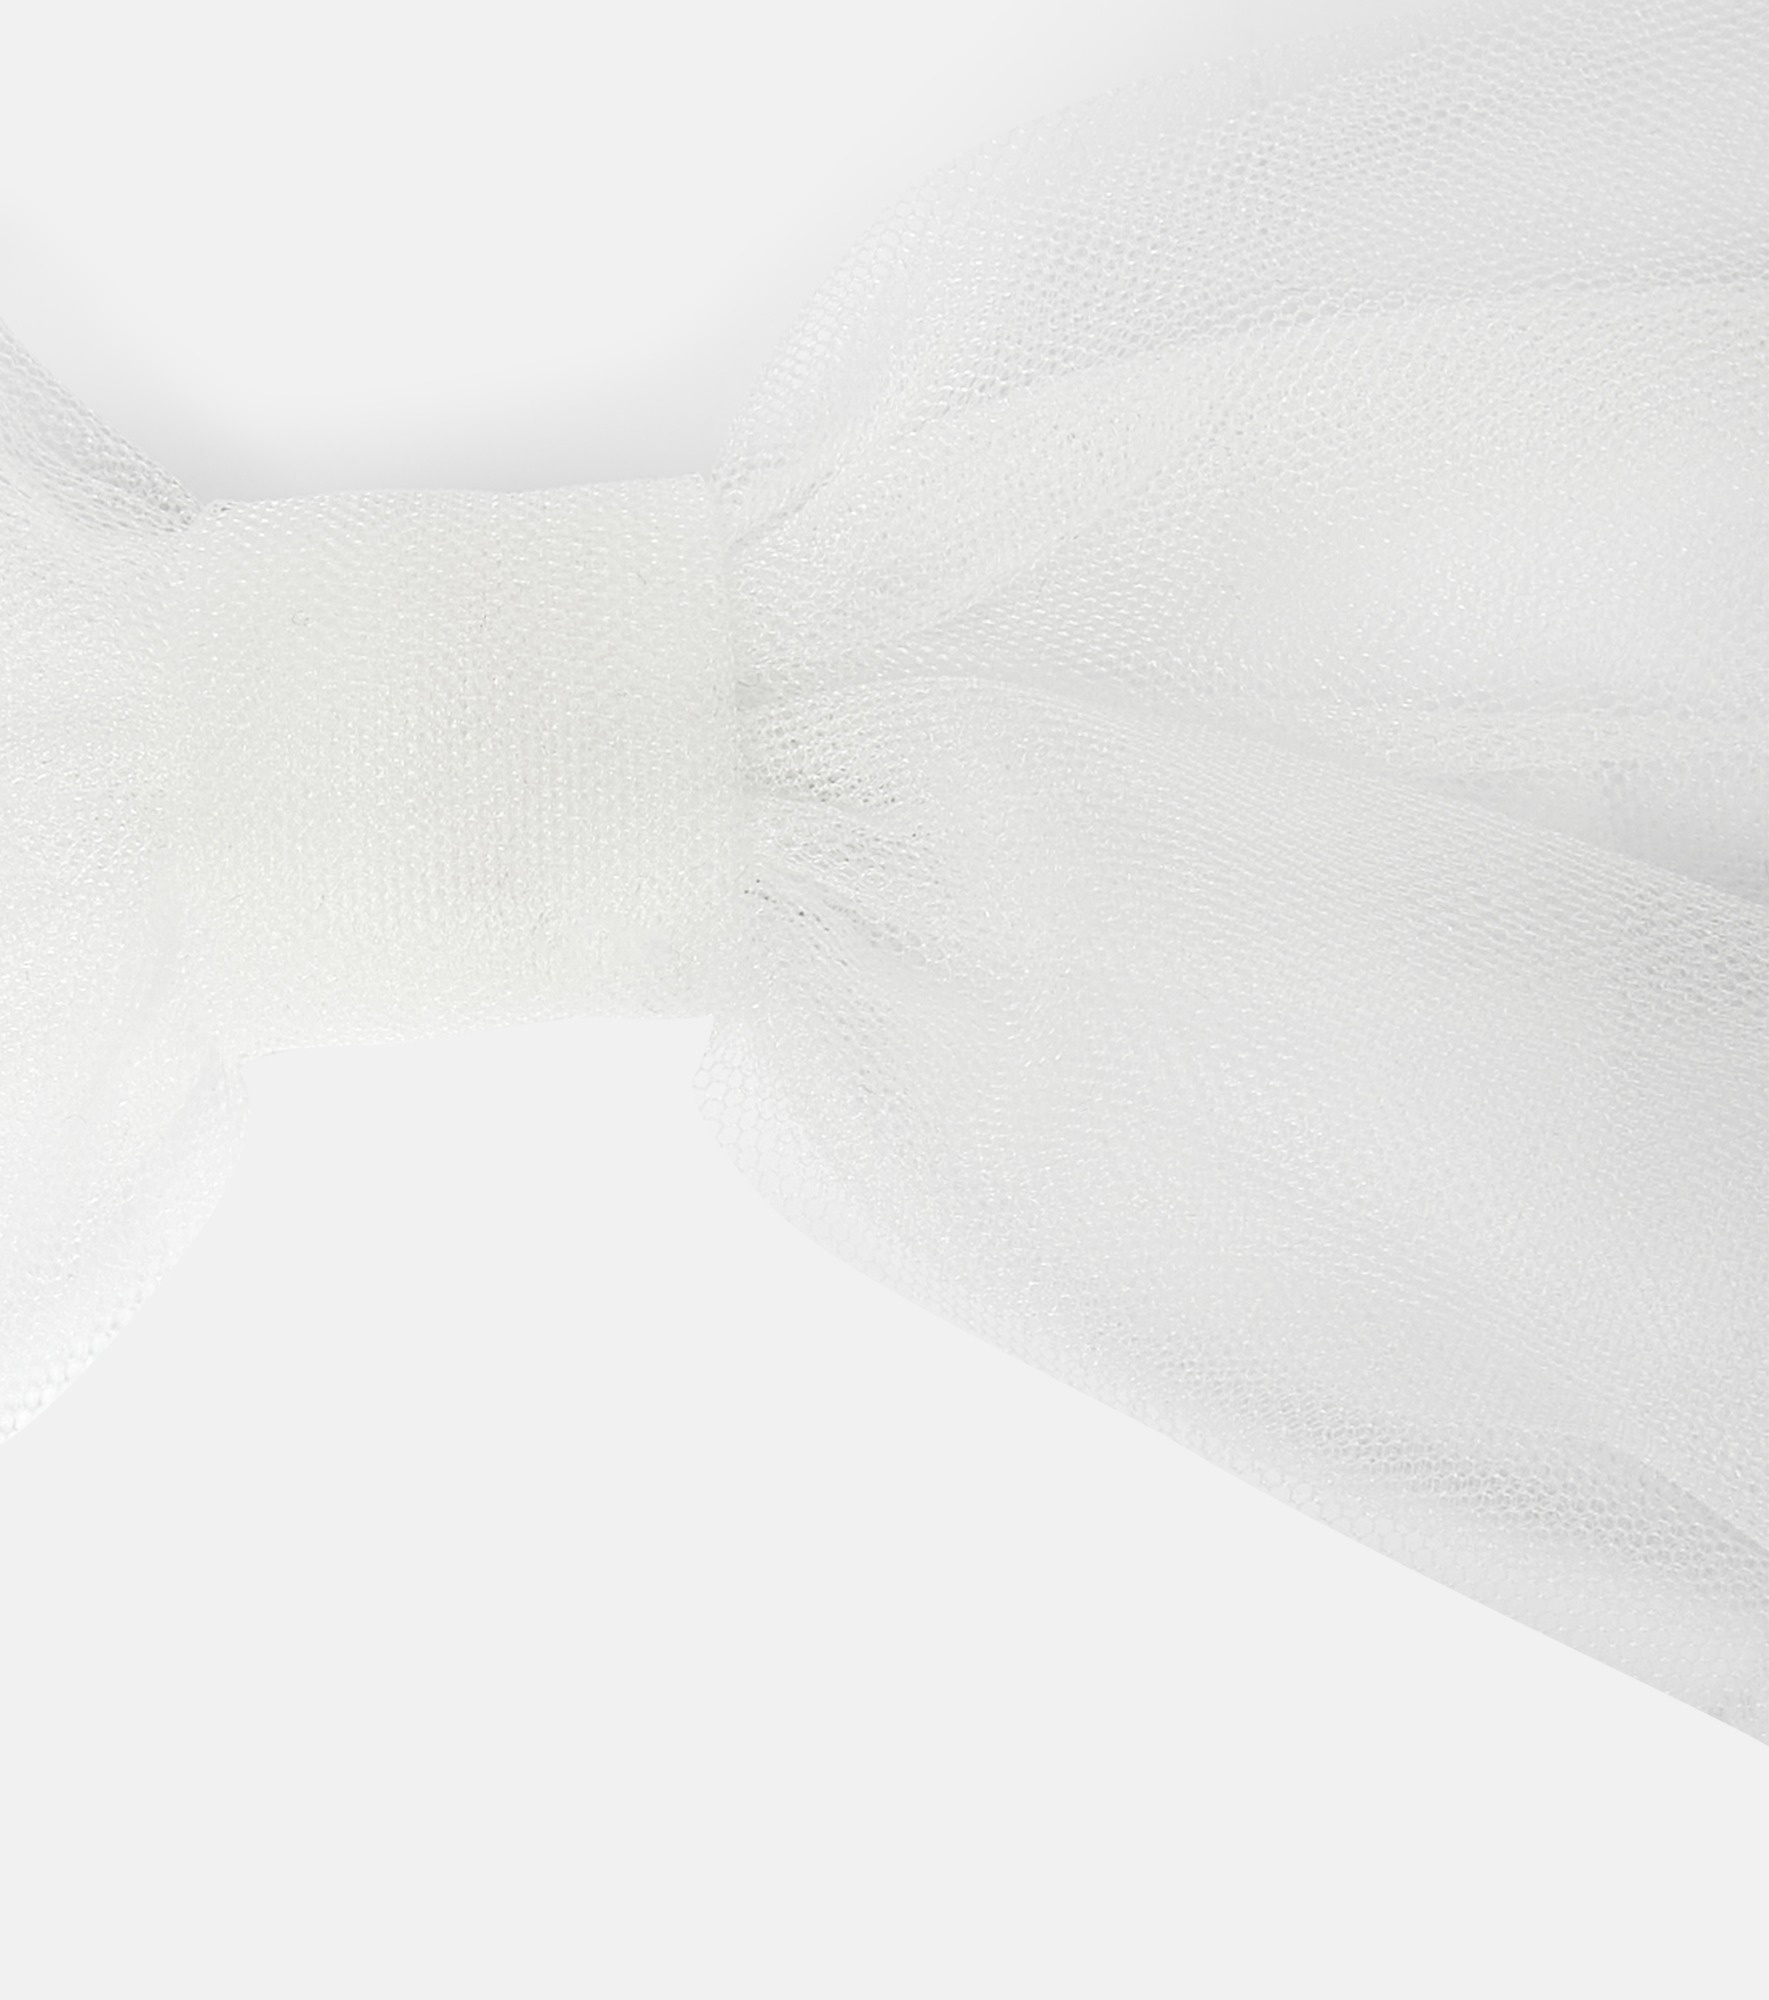 Bridal tulle bow - 3